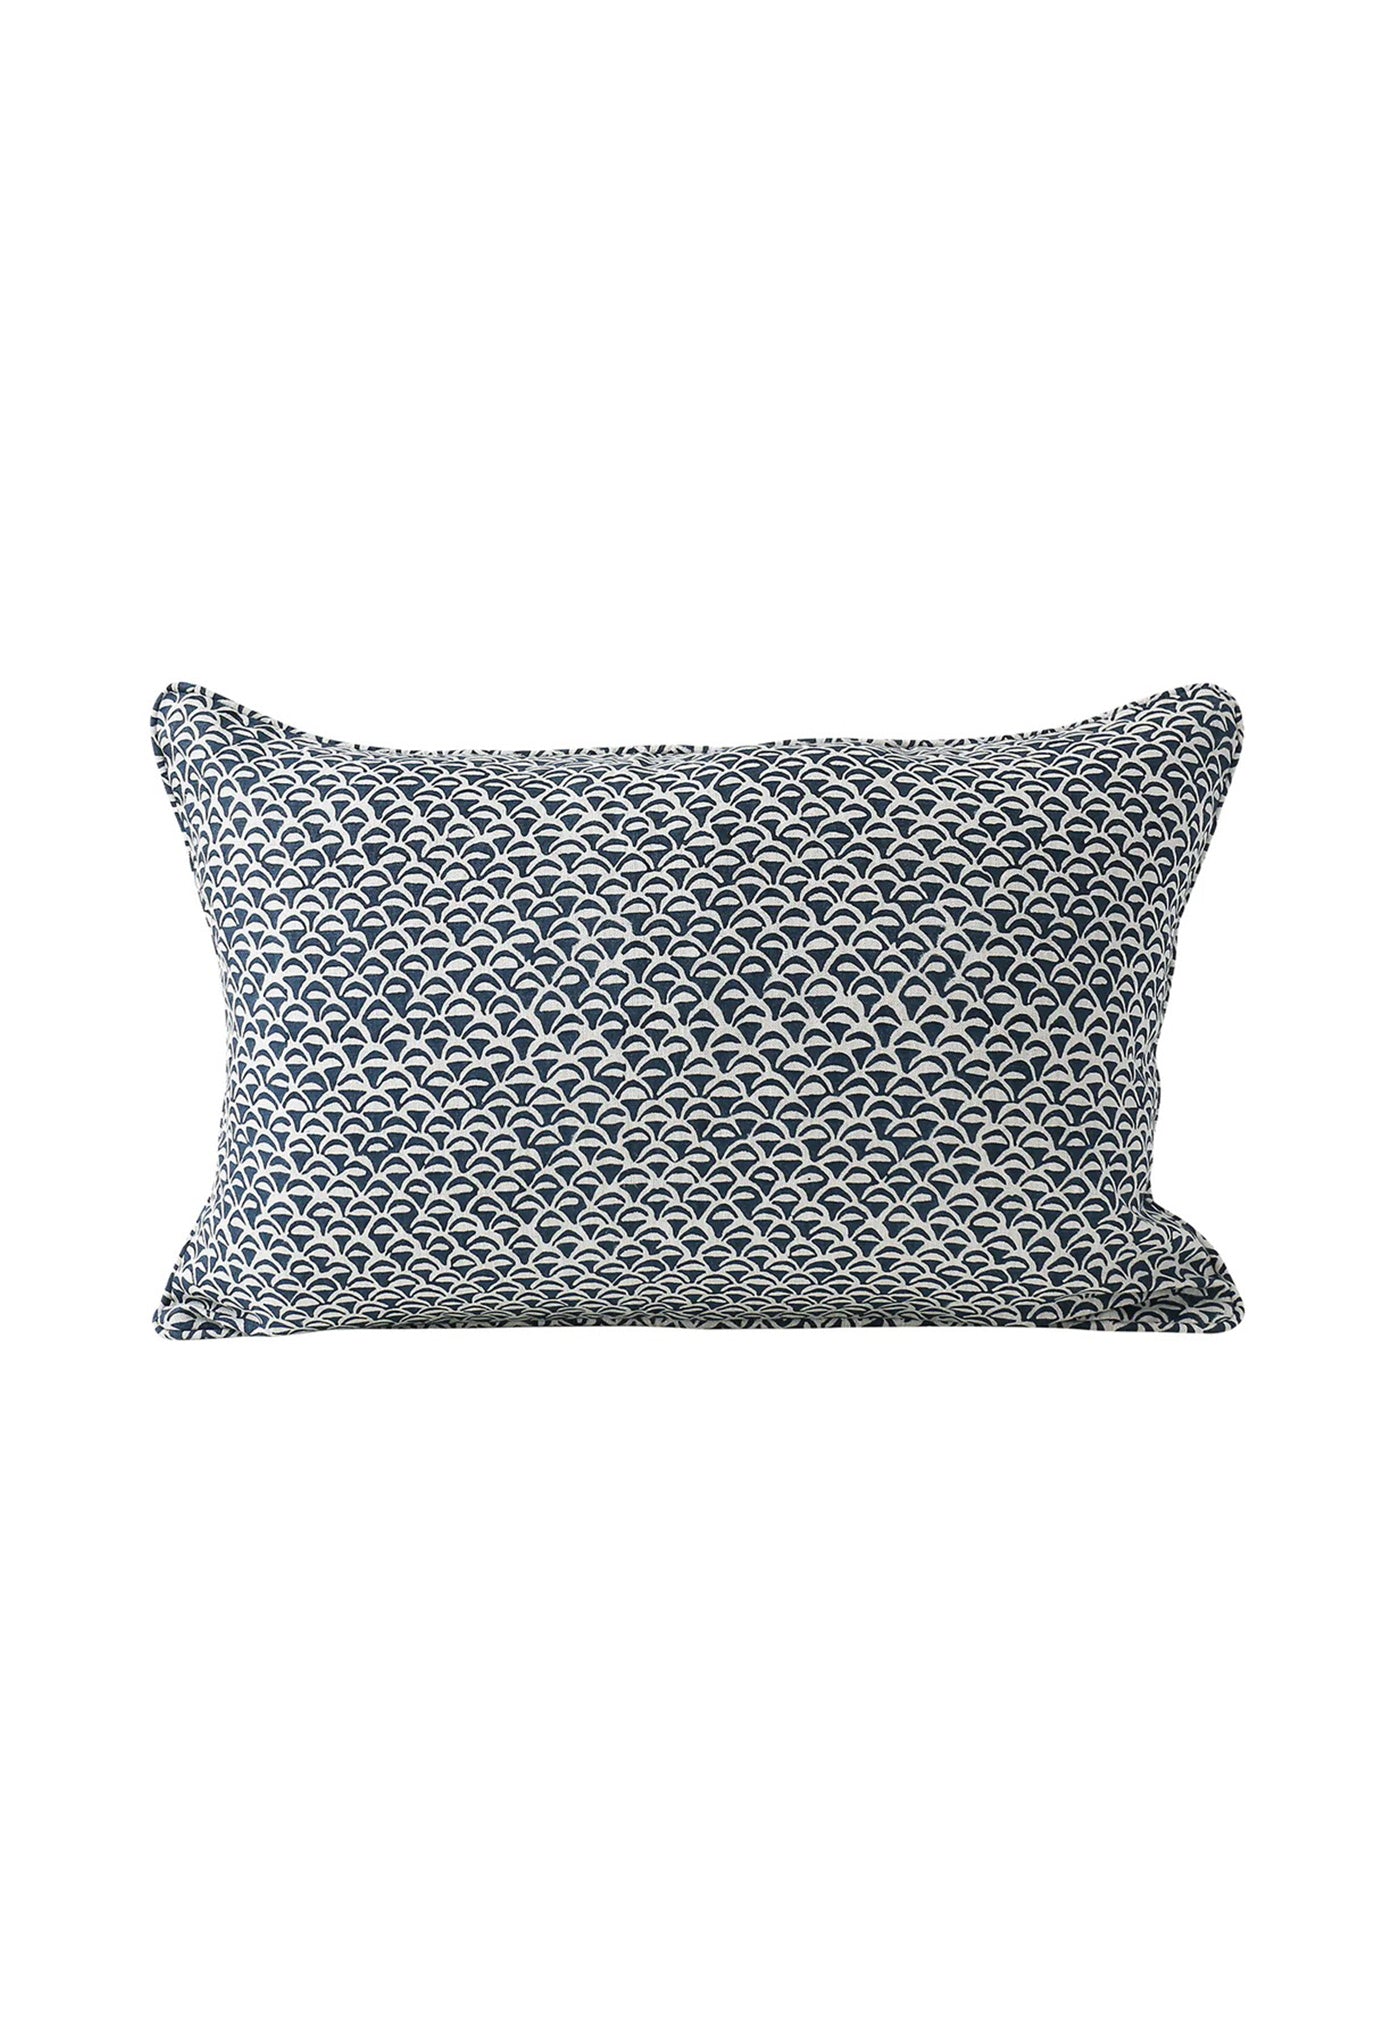 Moro Indian Teal Linen Cushion 35x55 sold by Angel Divine